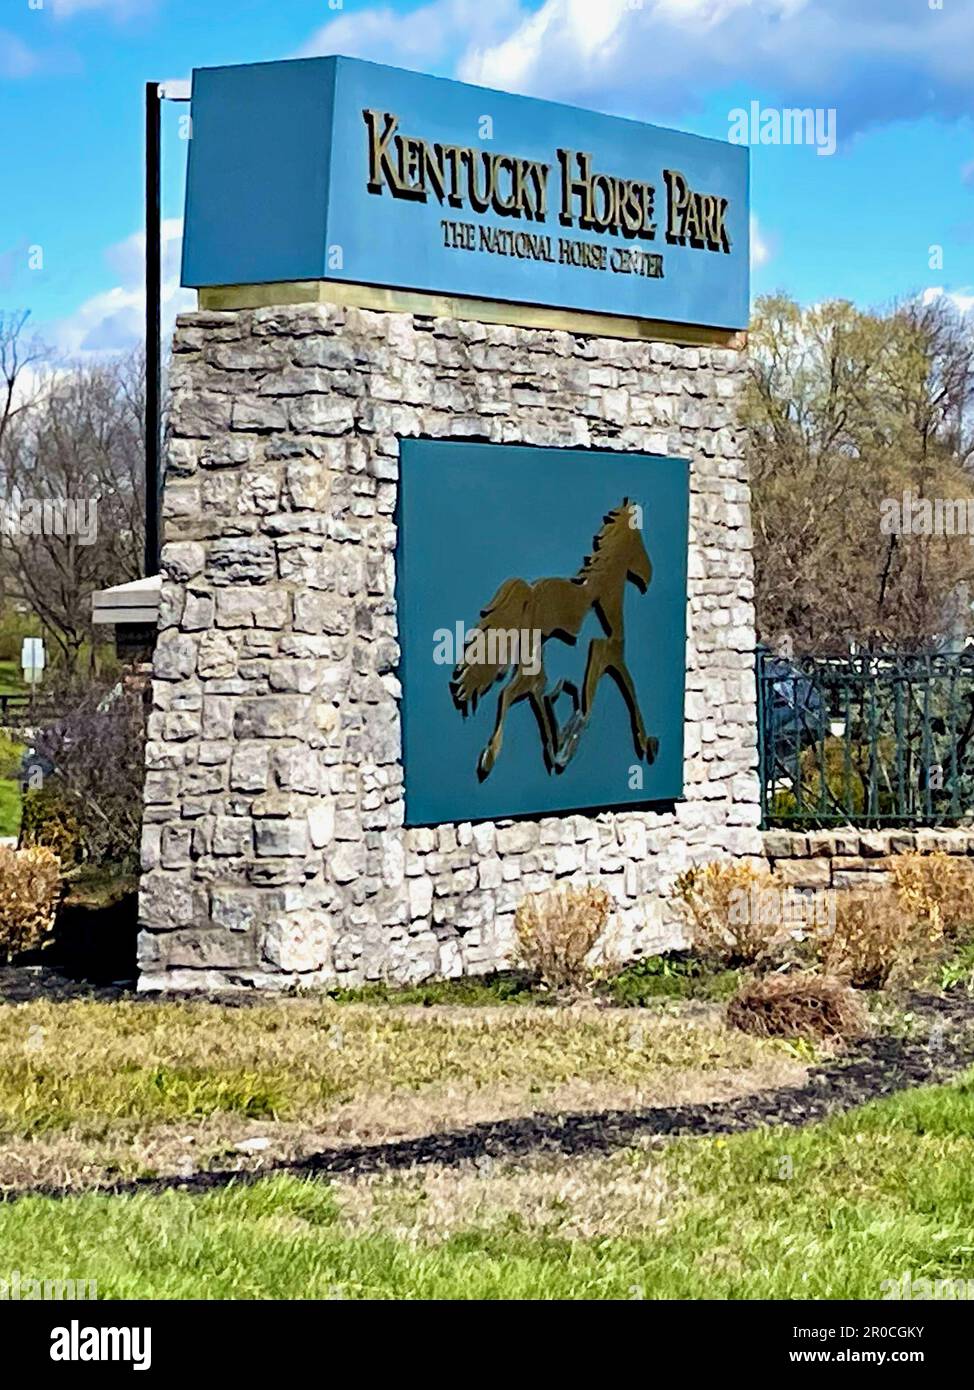 Entrance sign for the Kentucky Horse Park, a tourists destination home to several facilities focused on horse racing, popular in the Bluegrass State. Stock Photo